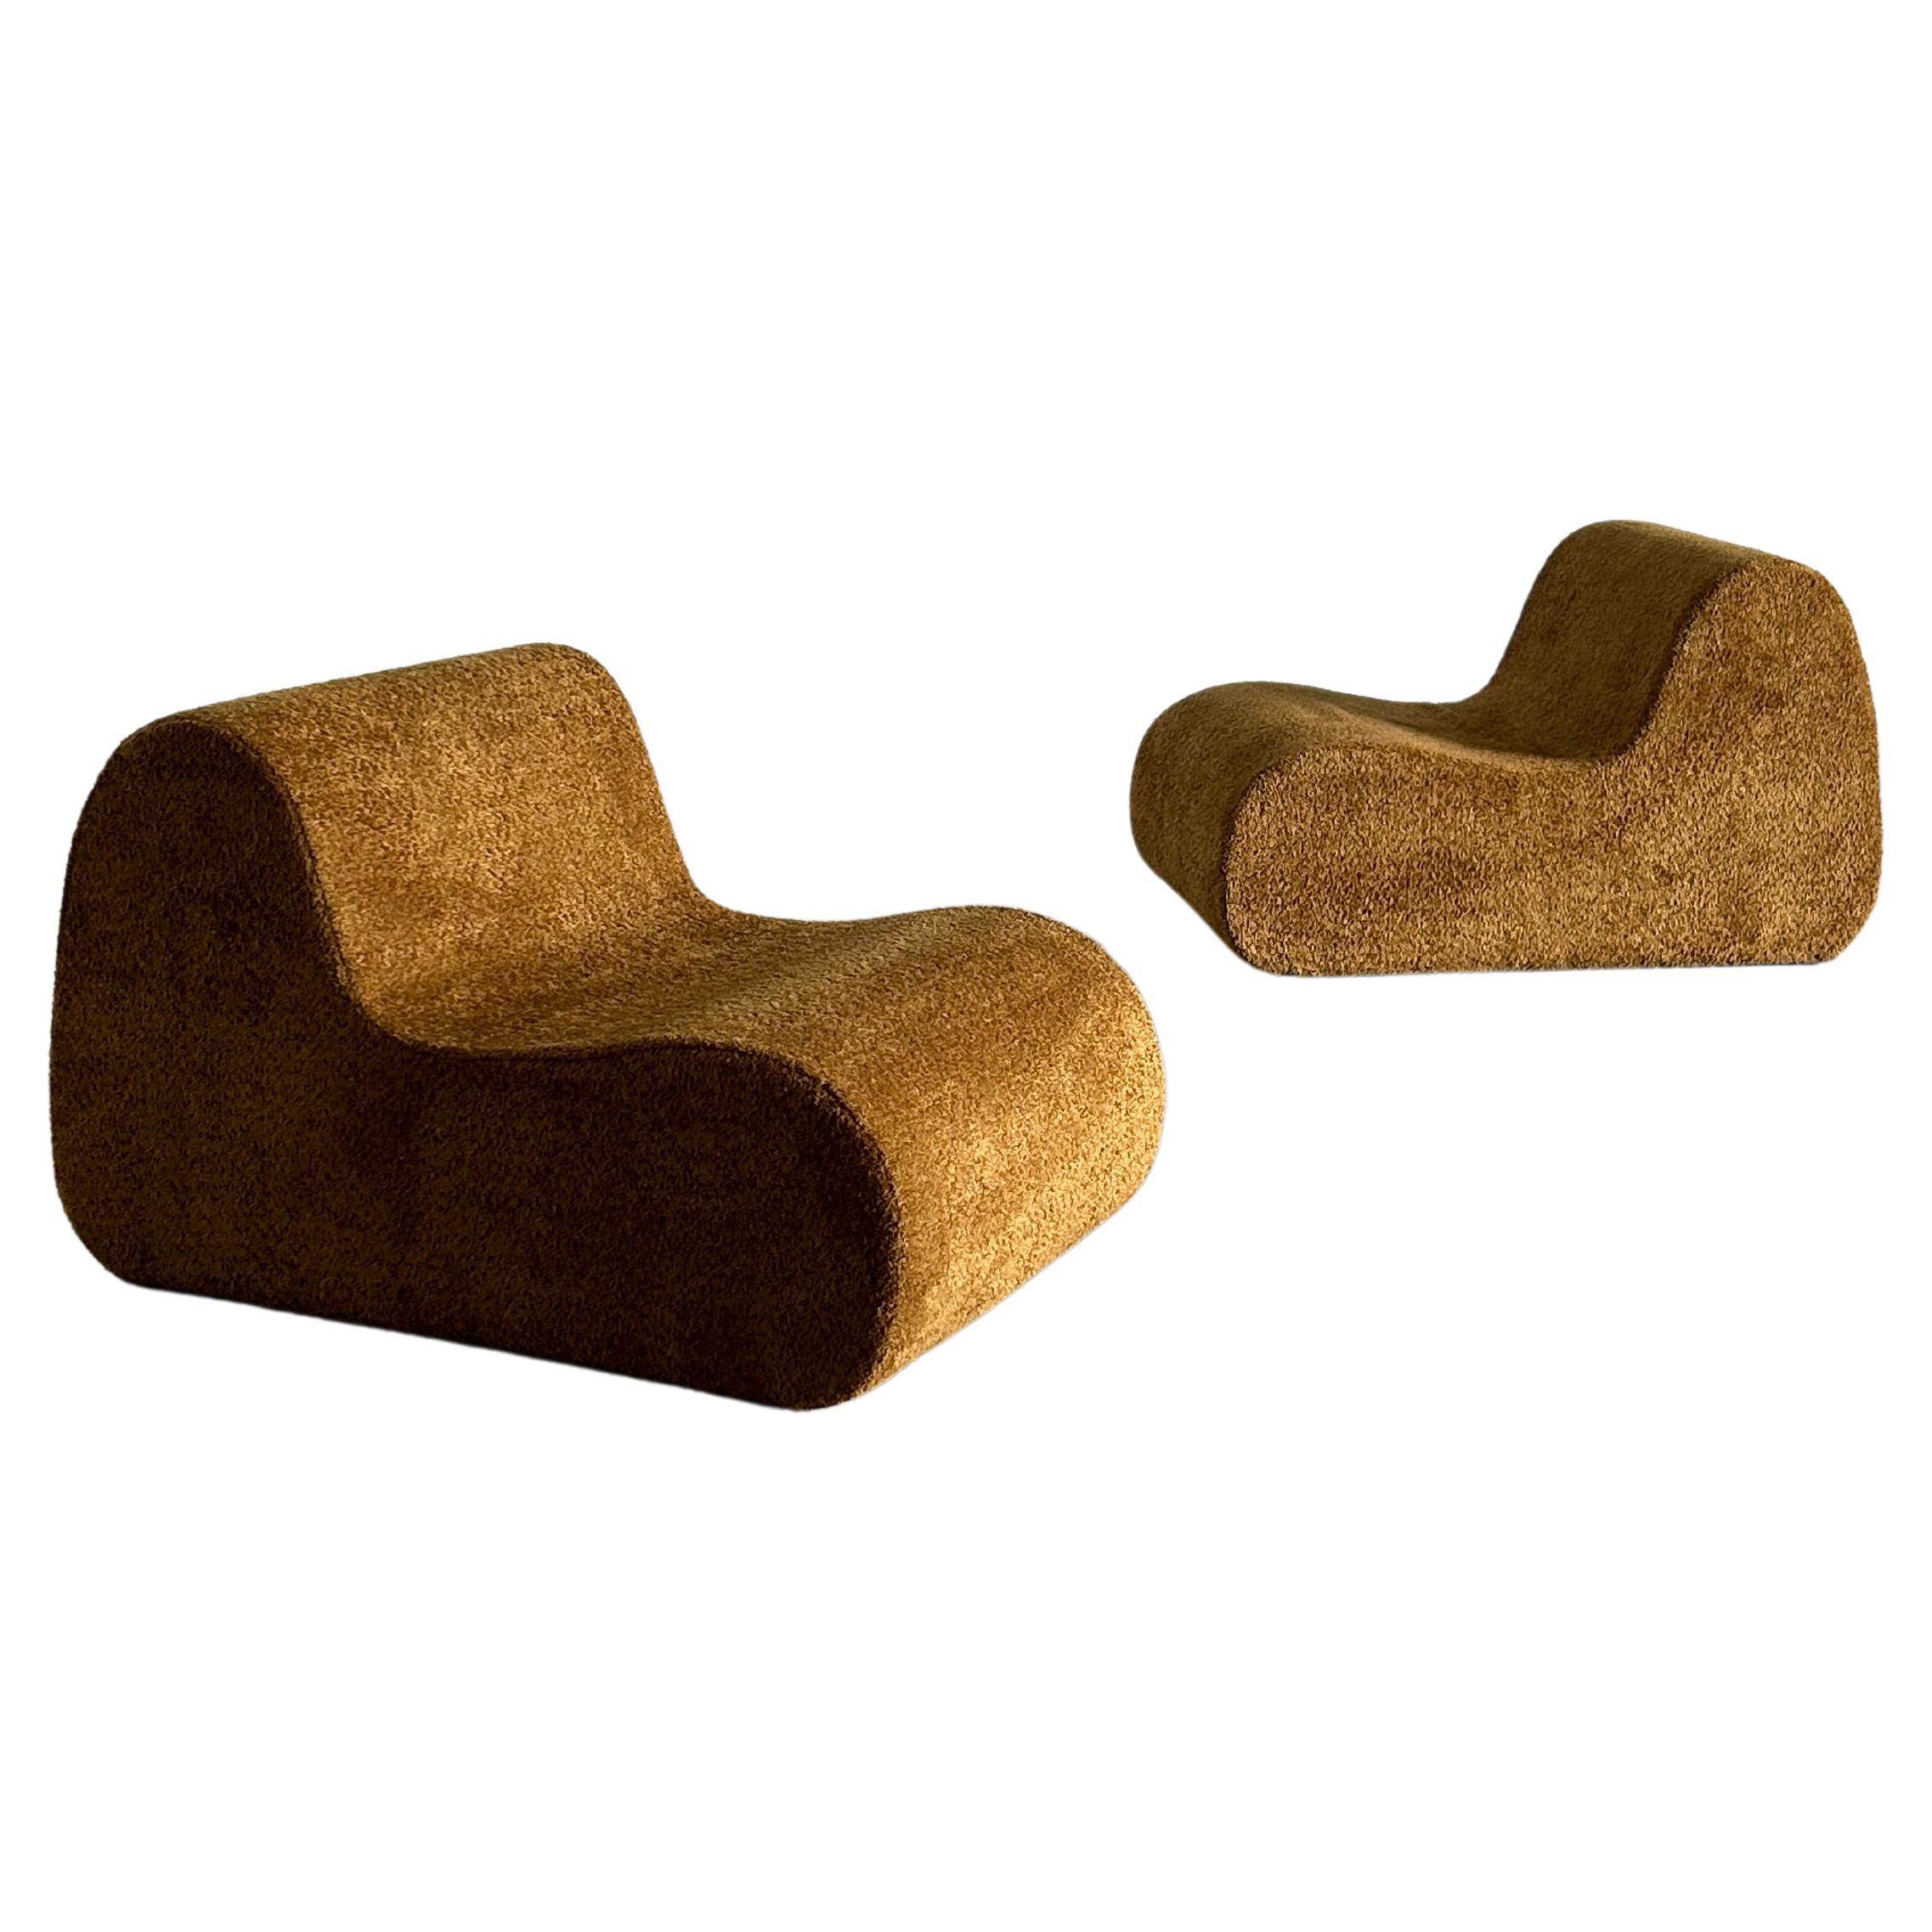 Vintage Italian Mid-Century Modern lounge chair or club chair.
Beautiful and unique shape.
Made entirely from a foam structure with a wooden base and reupholstered in quality ochre coloured boucle fabric.

Sold per piece.
Eight pieces